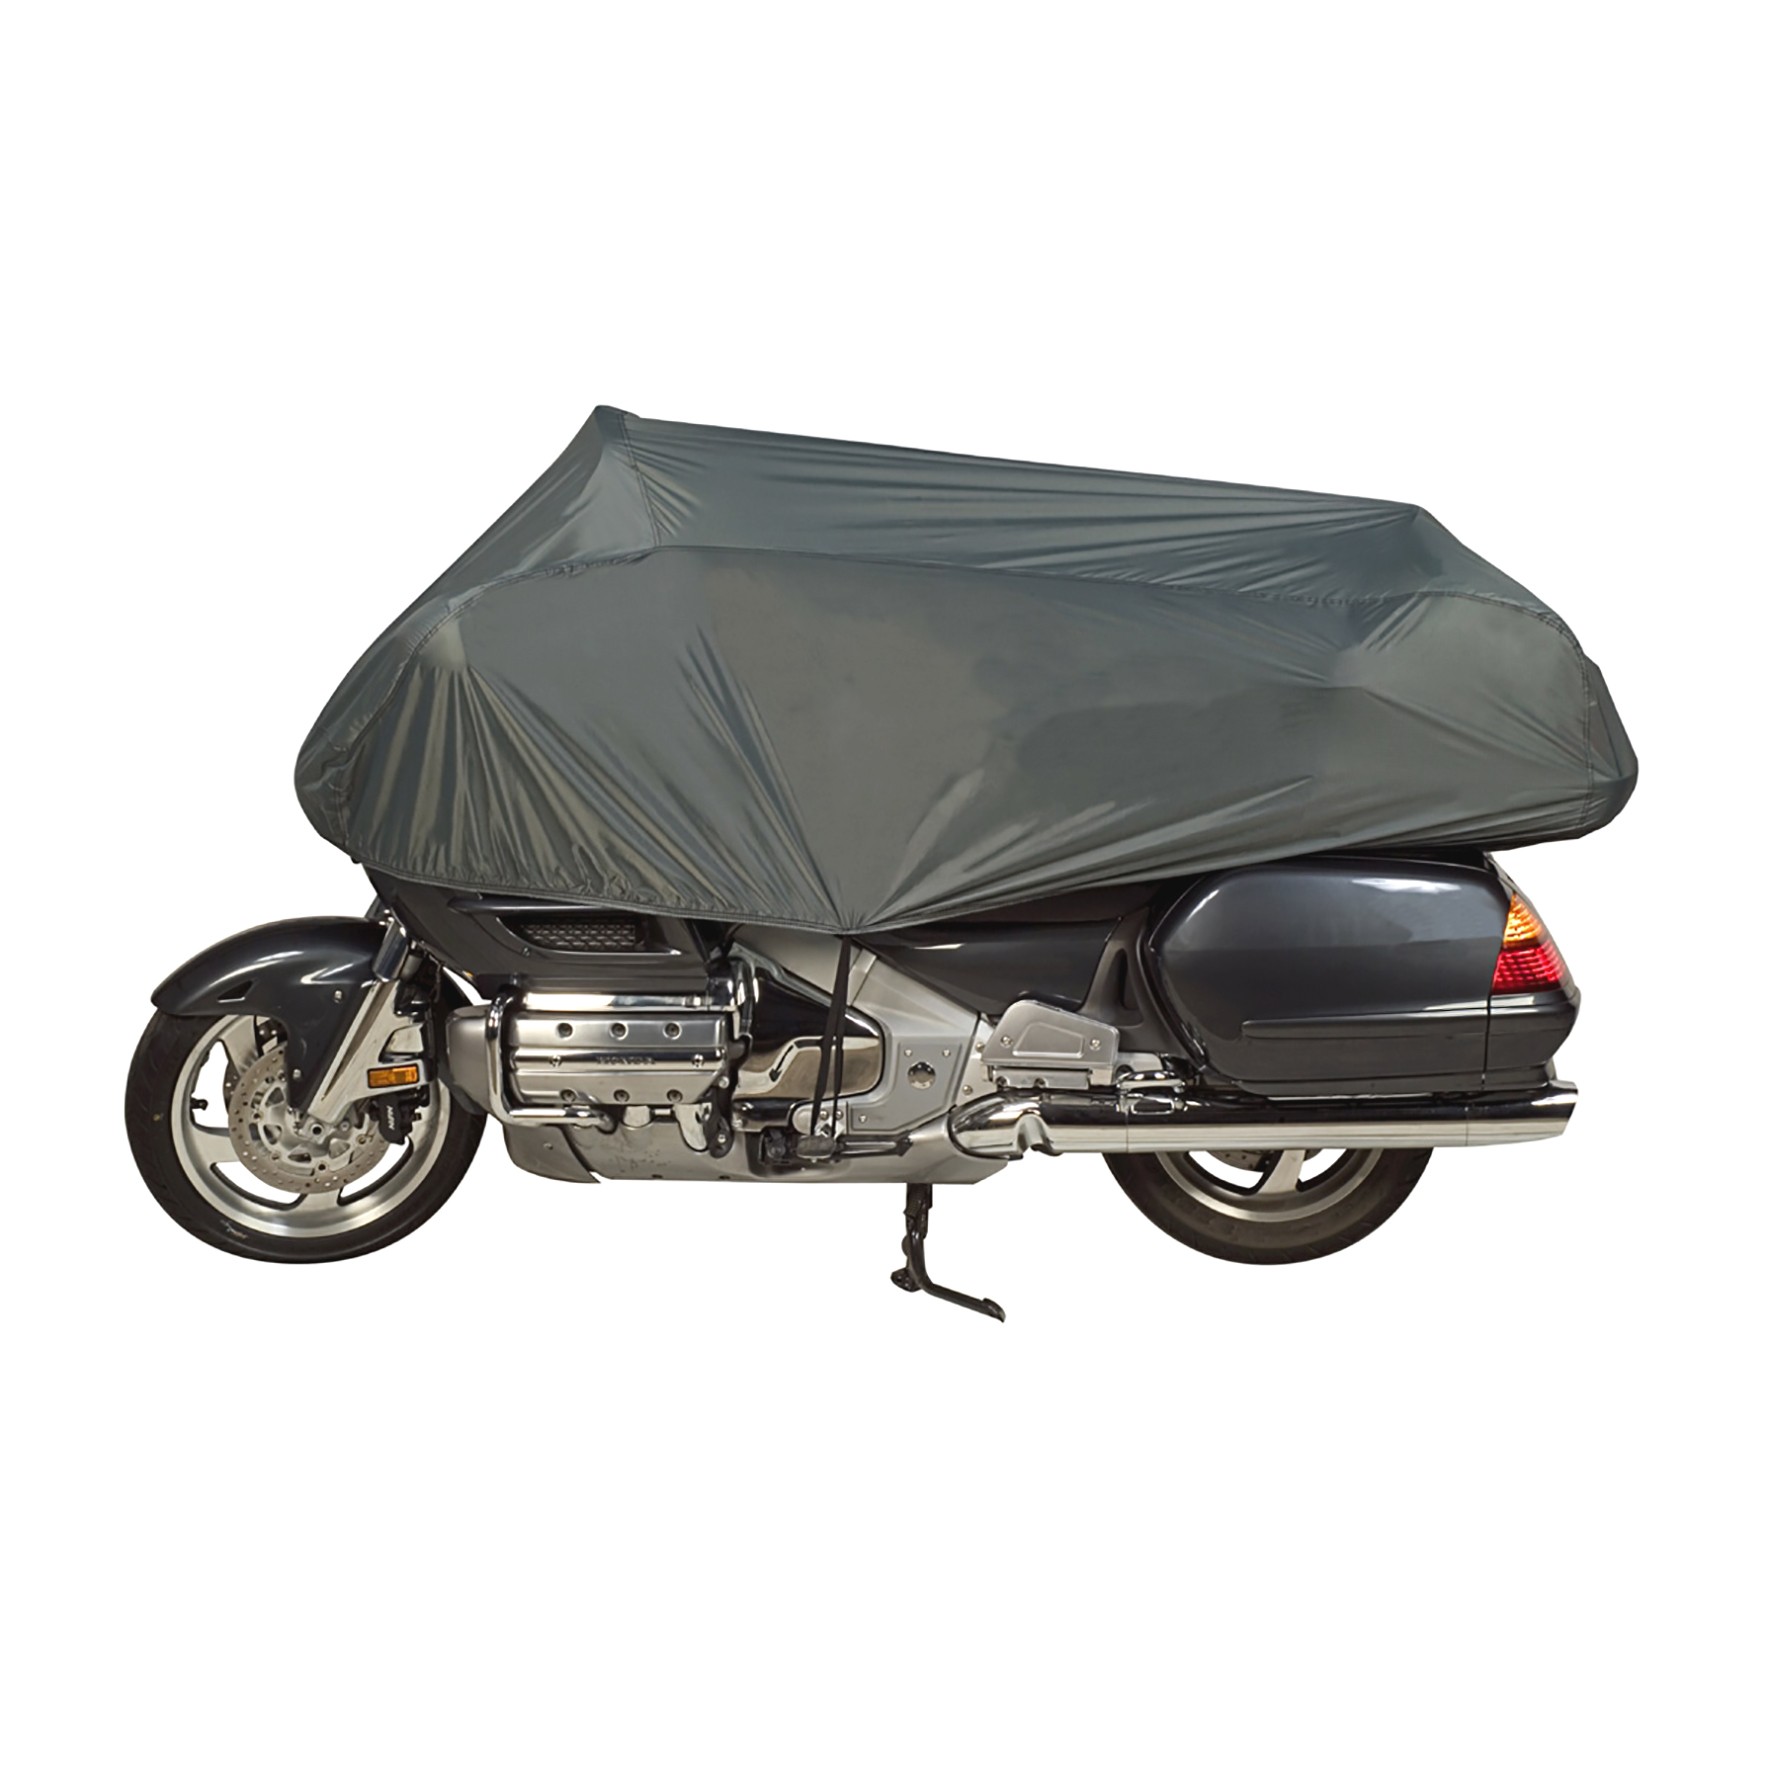 Details about   Ultralite Motorcycle Cover~1987 Yamaha FZR1000 Street Motorcycle Dowco 26010-00